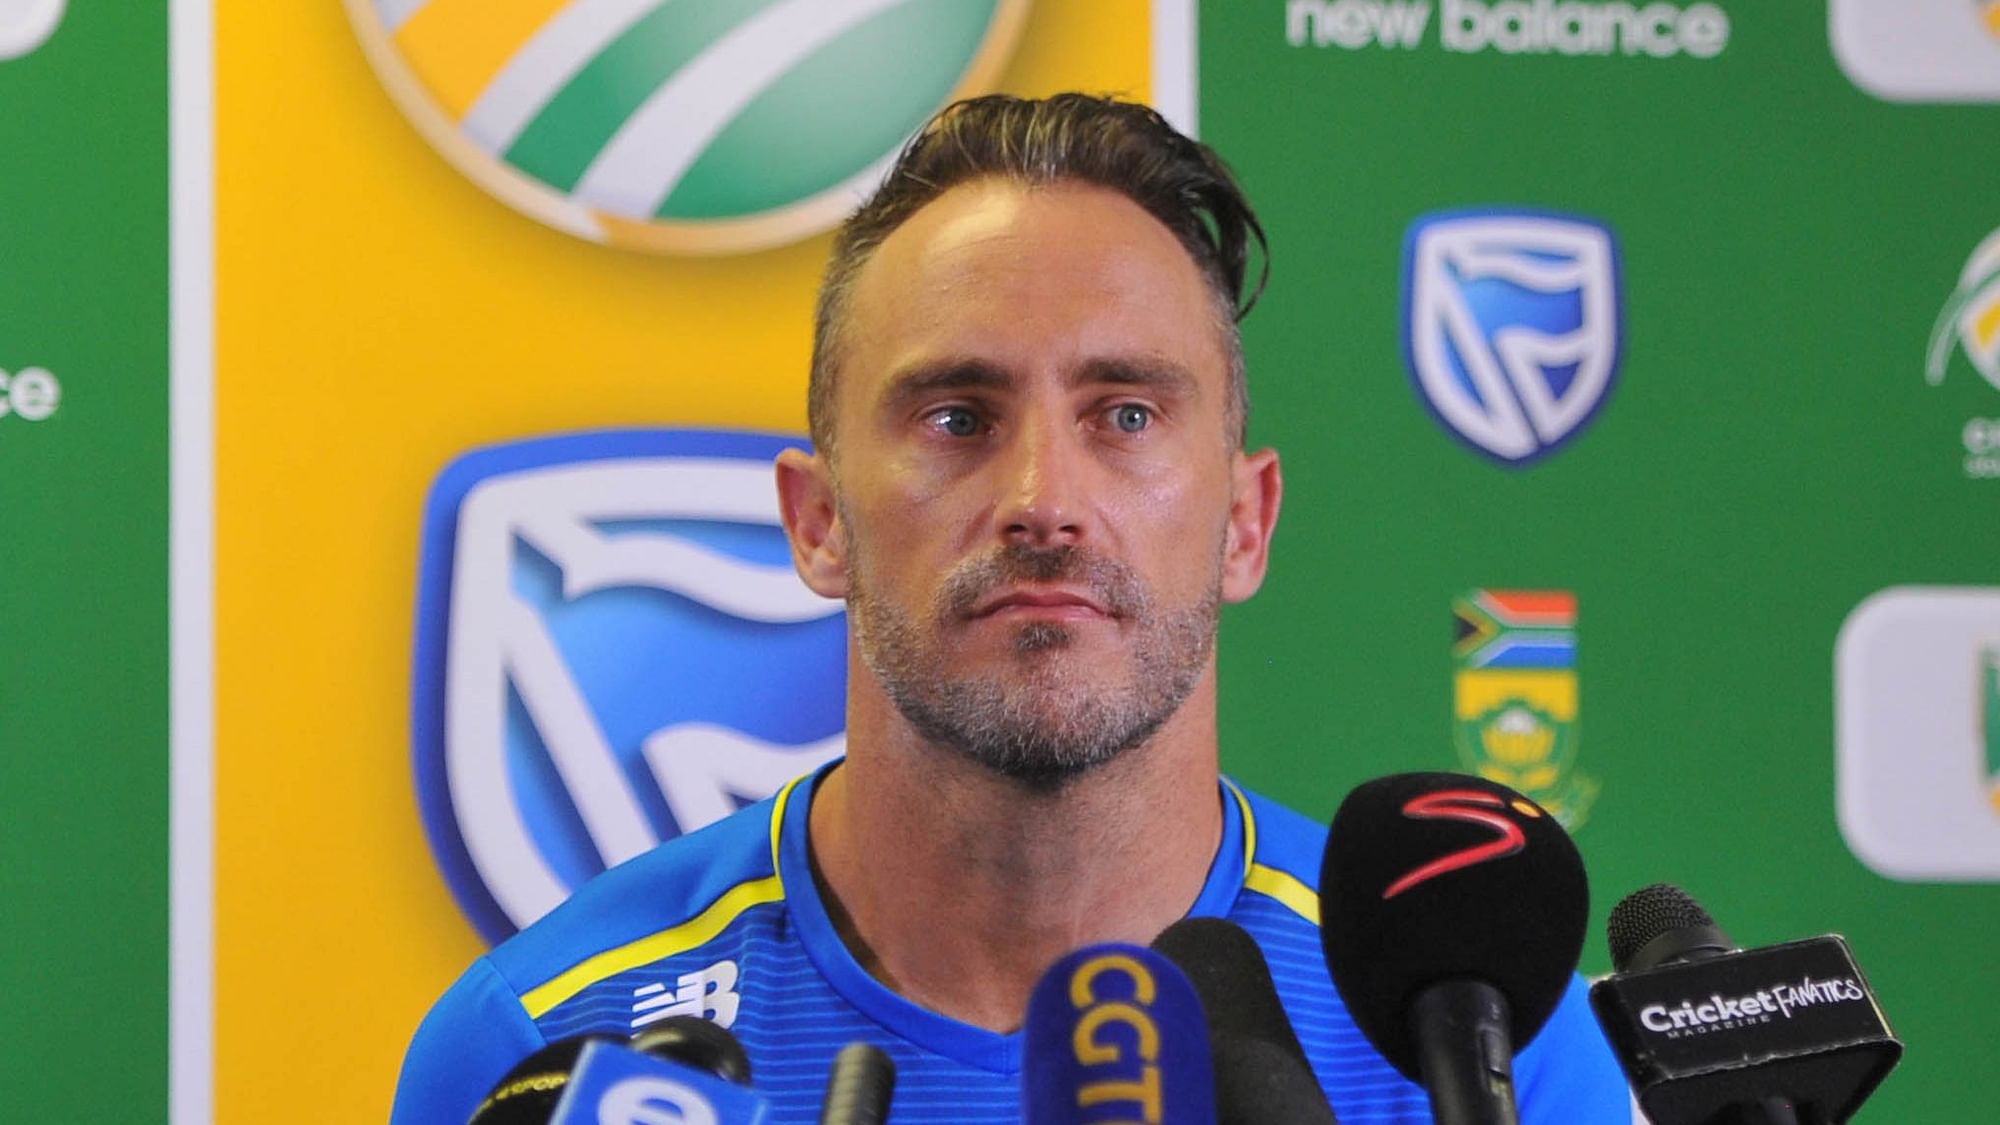 Faf du Plessis captained South Africa in a total of 112 international matches across all three formats 